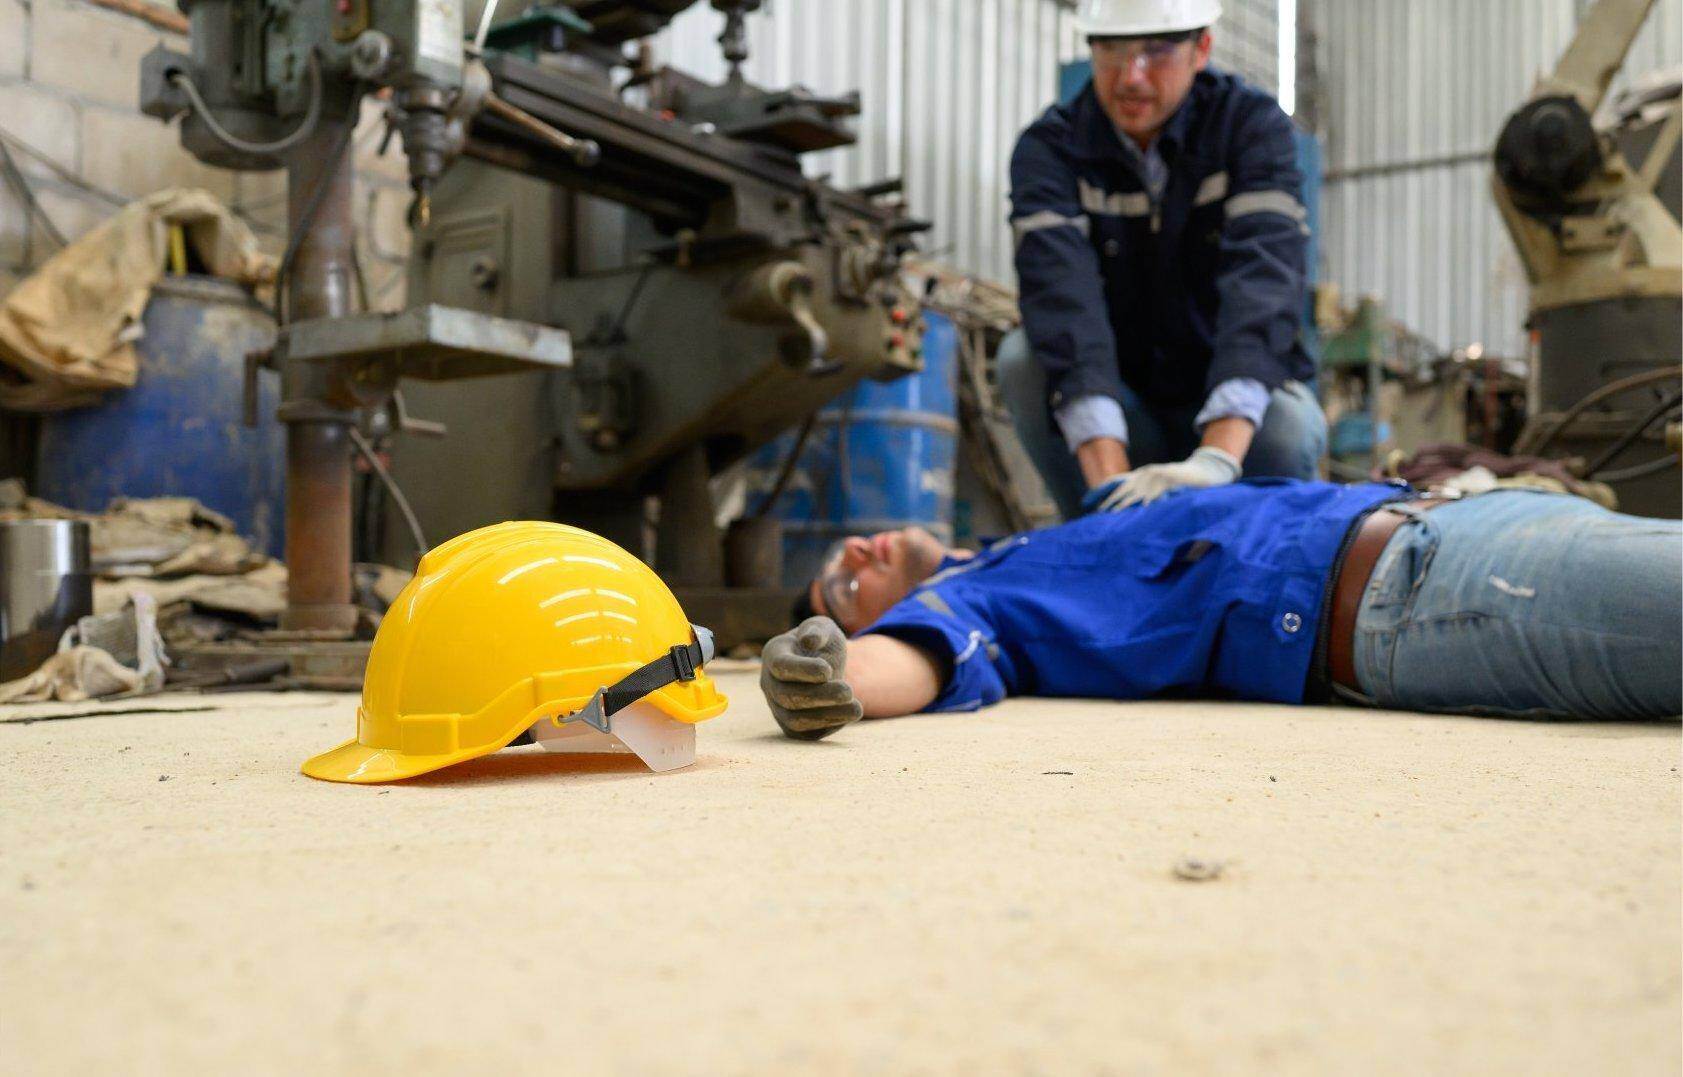 An unconscious man who has been injured on the job who will file for workers compensation in Roswell, Georgia